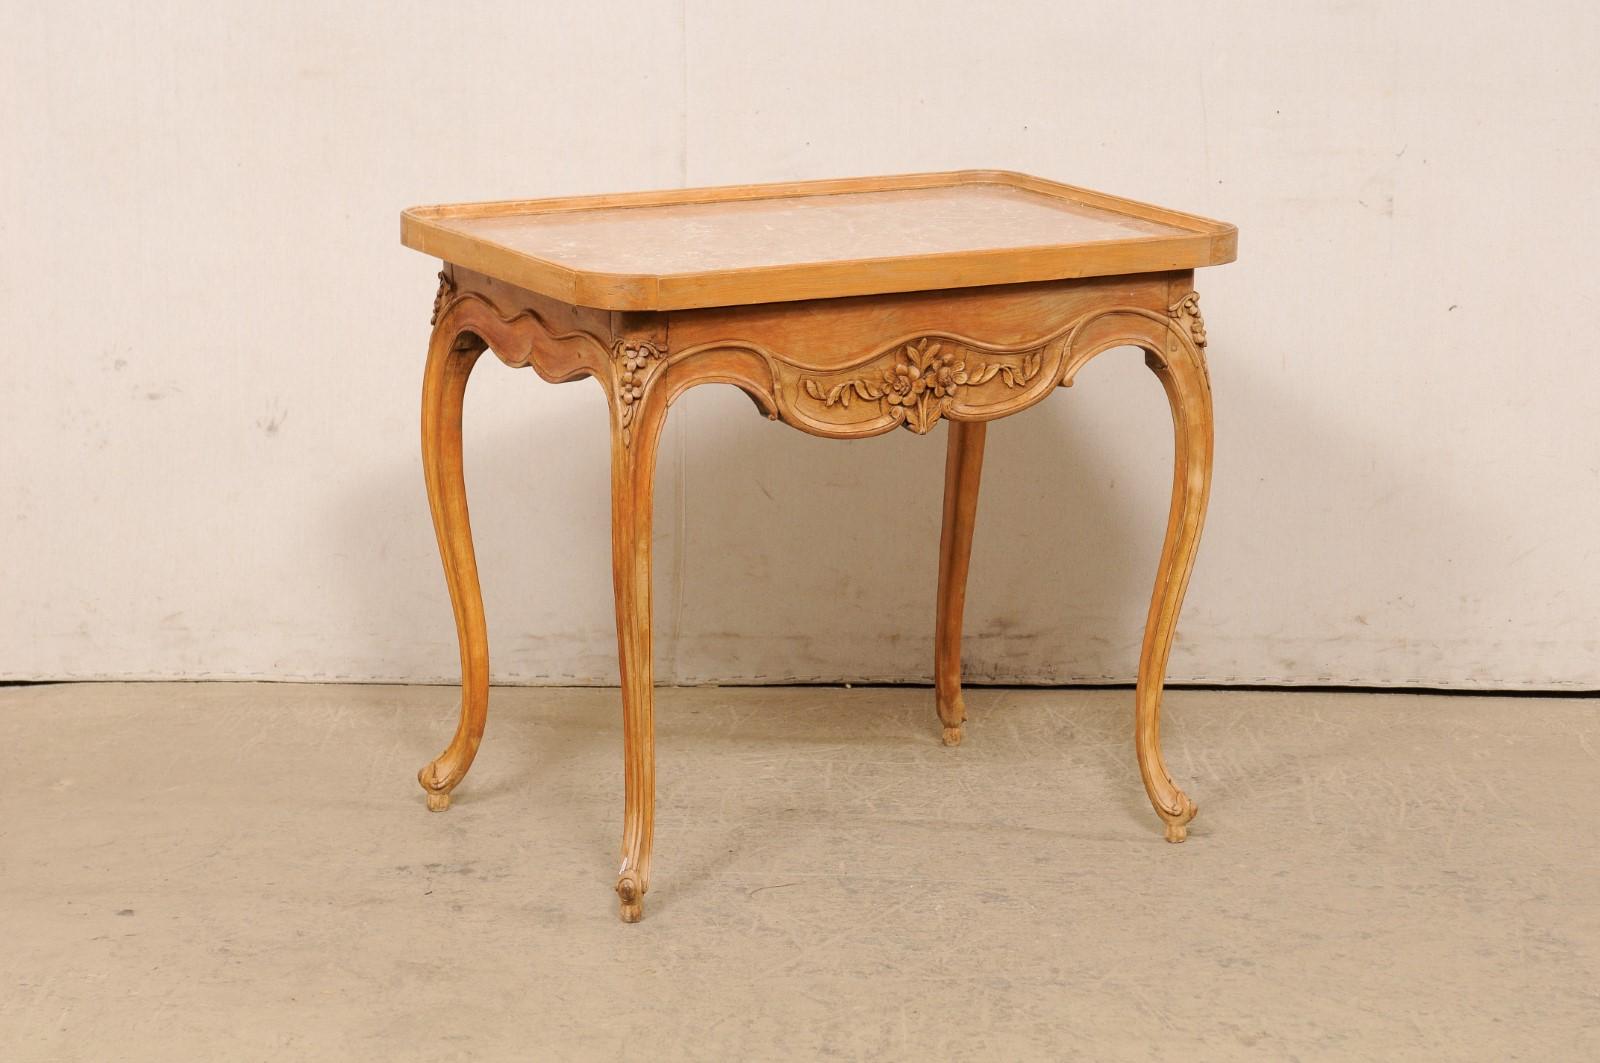 A French carved-wood occasional table with single drawer, from the turn of the 18th and 19th century. This antique side table from France has a rectangular-shaped, tray-style top with raised lip, rounded corners and fitted with marble at its center.